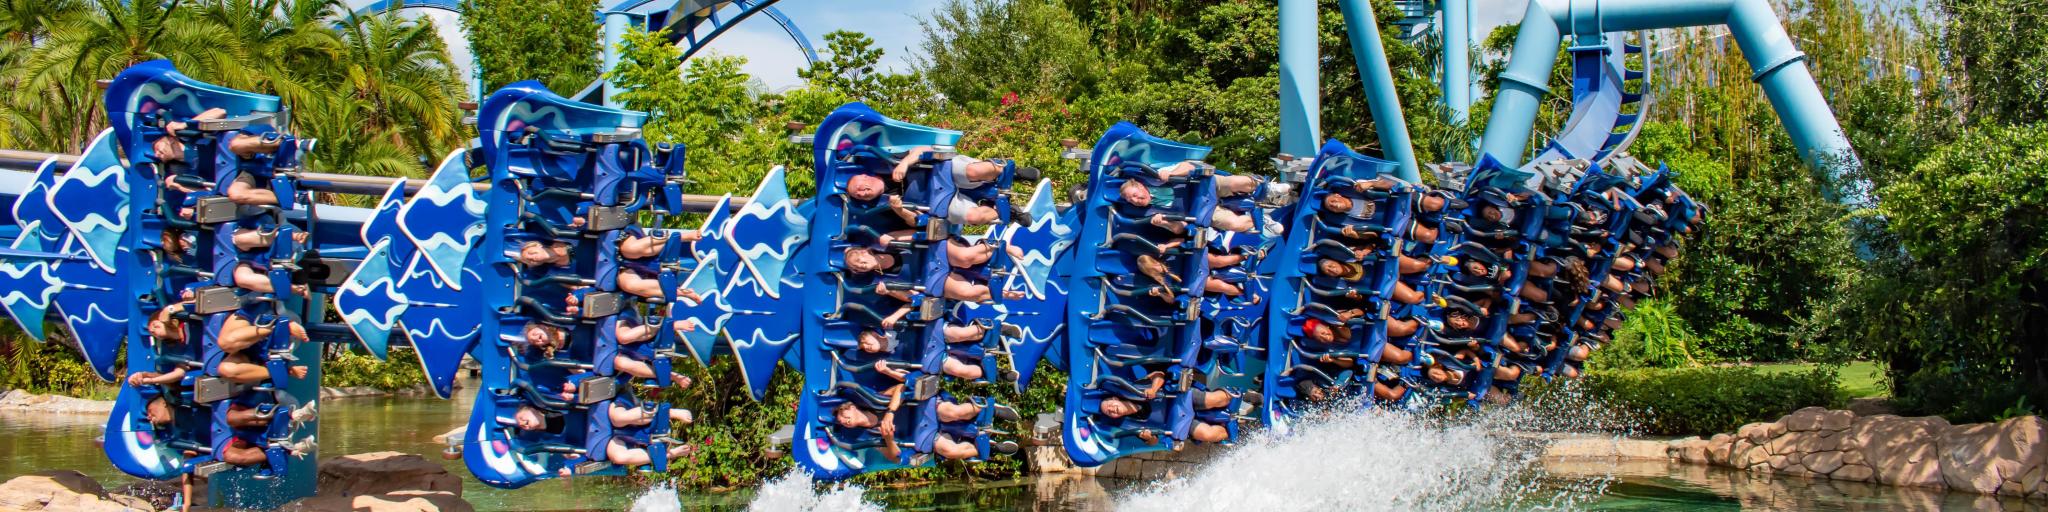 Up close shot of people riding and having fun on the bright blue Manta Ray rollercoaster in action at Seaworld 